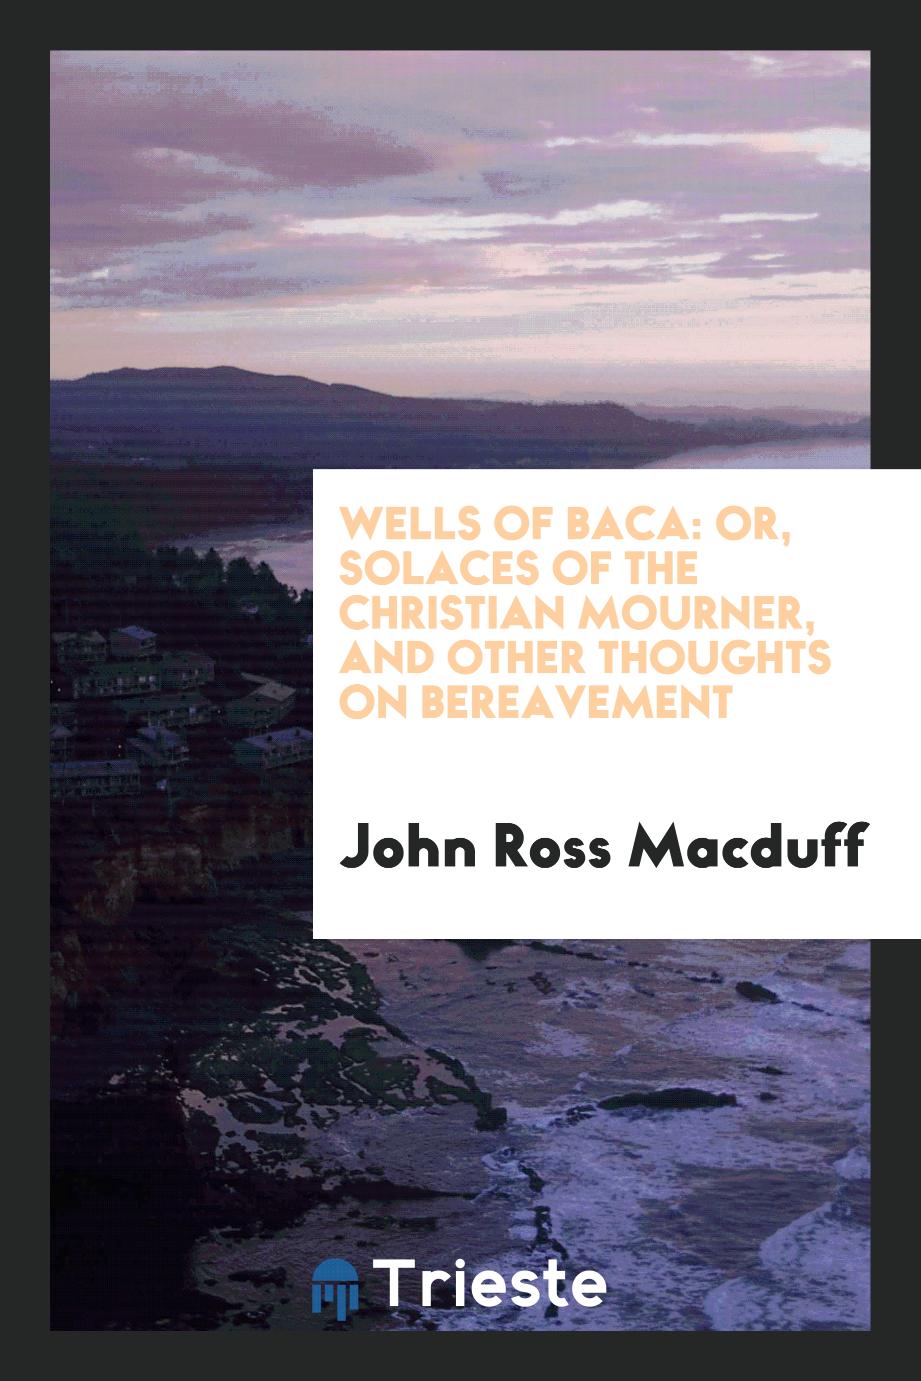 Wells of Baca: Or, Solaces of the Christian Mourner, and Other Thoughts on Bereavement